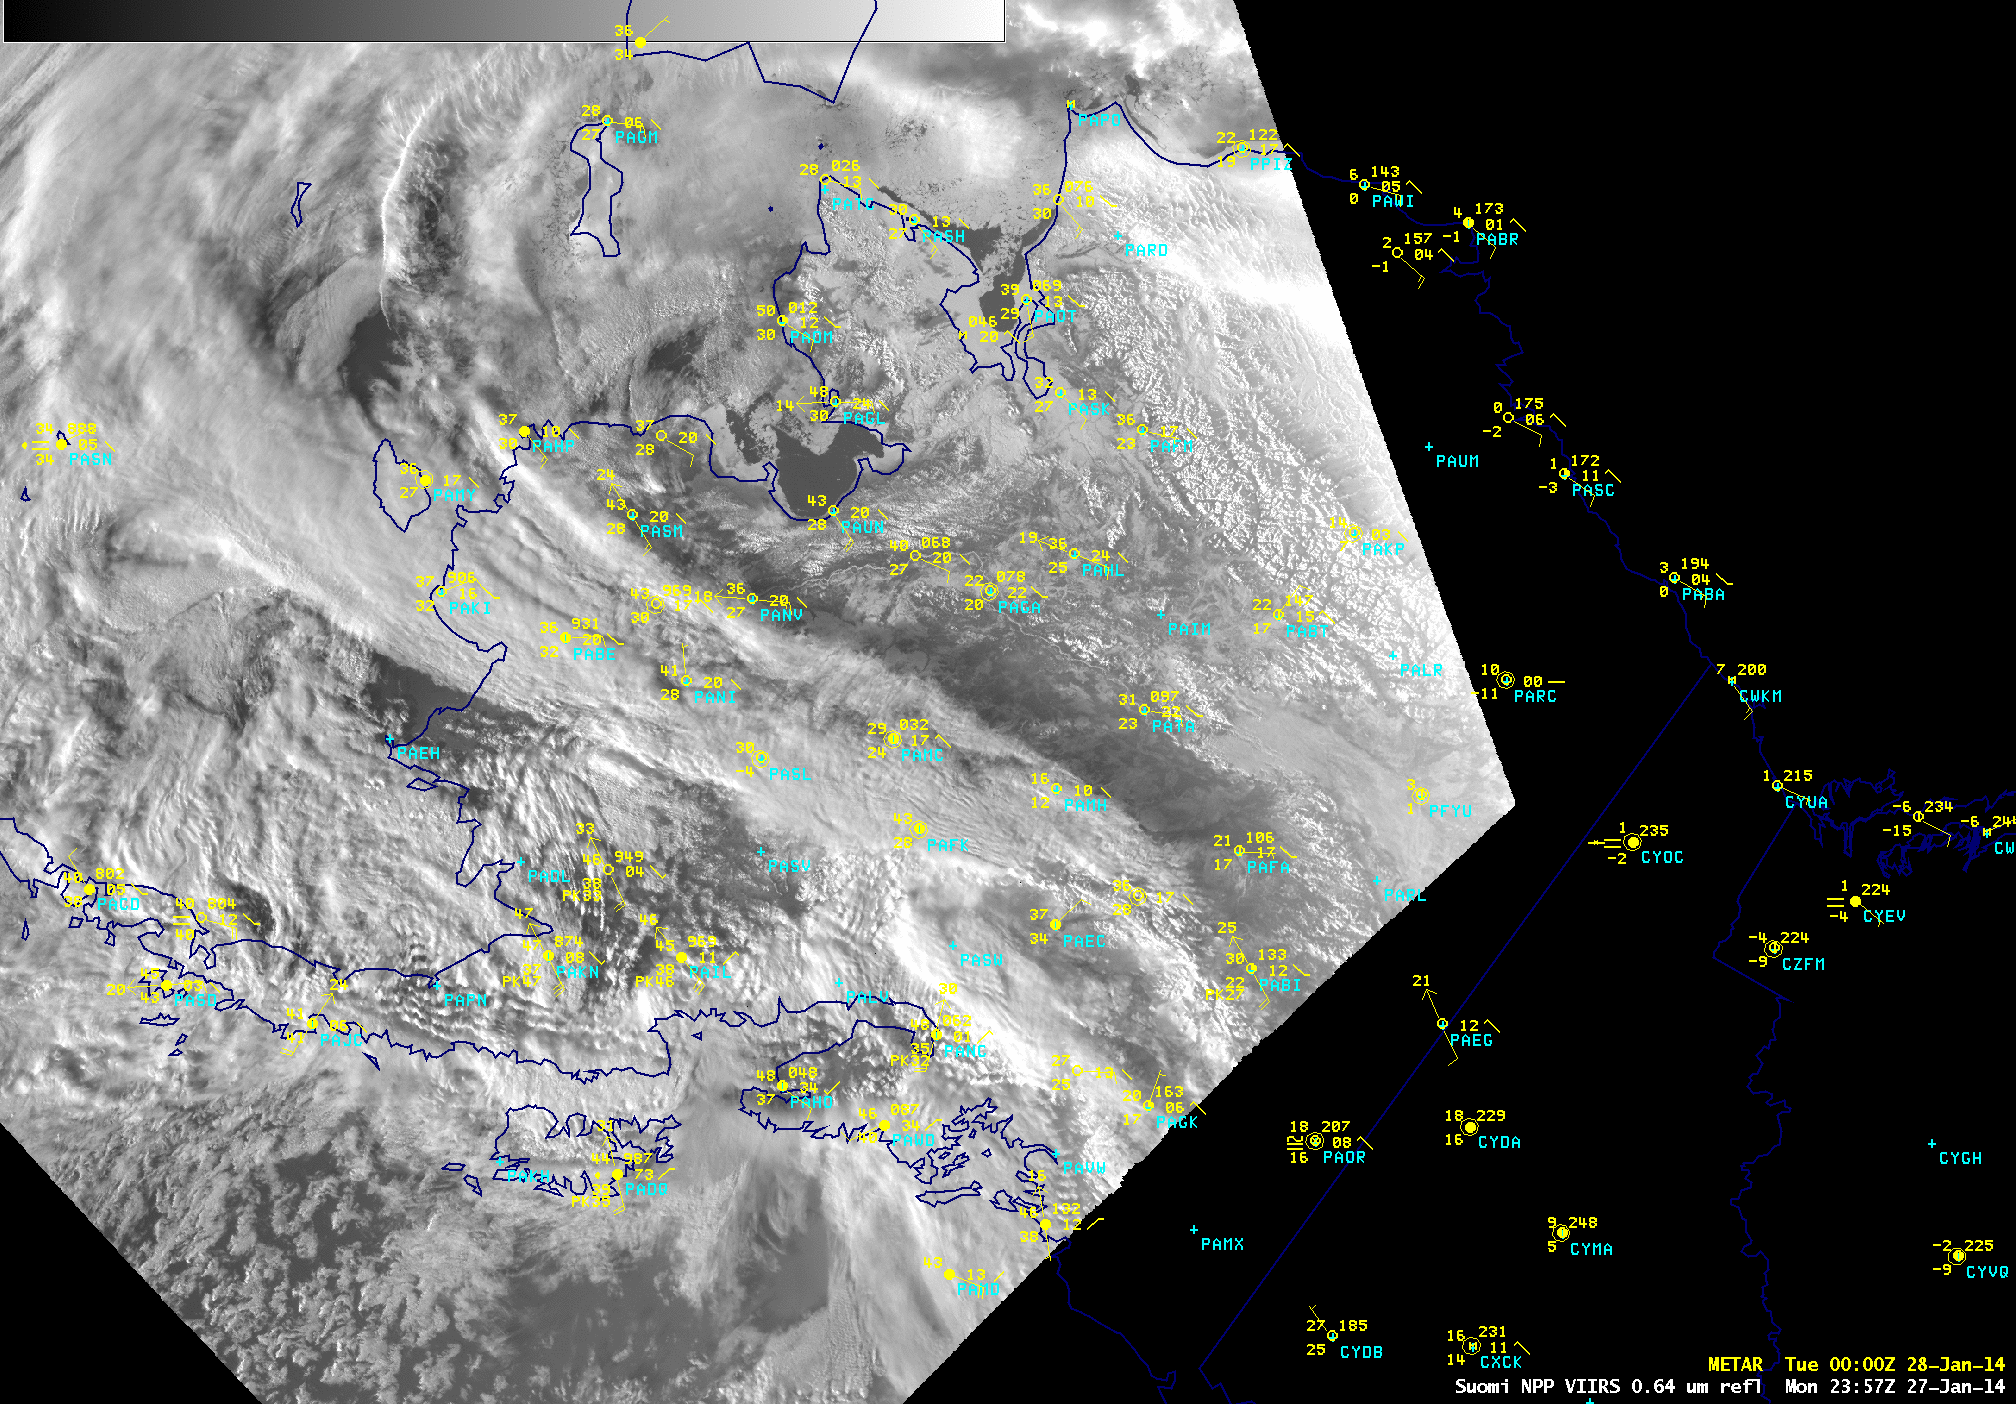 Suomi NPP VIIRS 0.64 Âµm visible channel and False-color RGB images